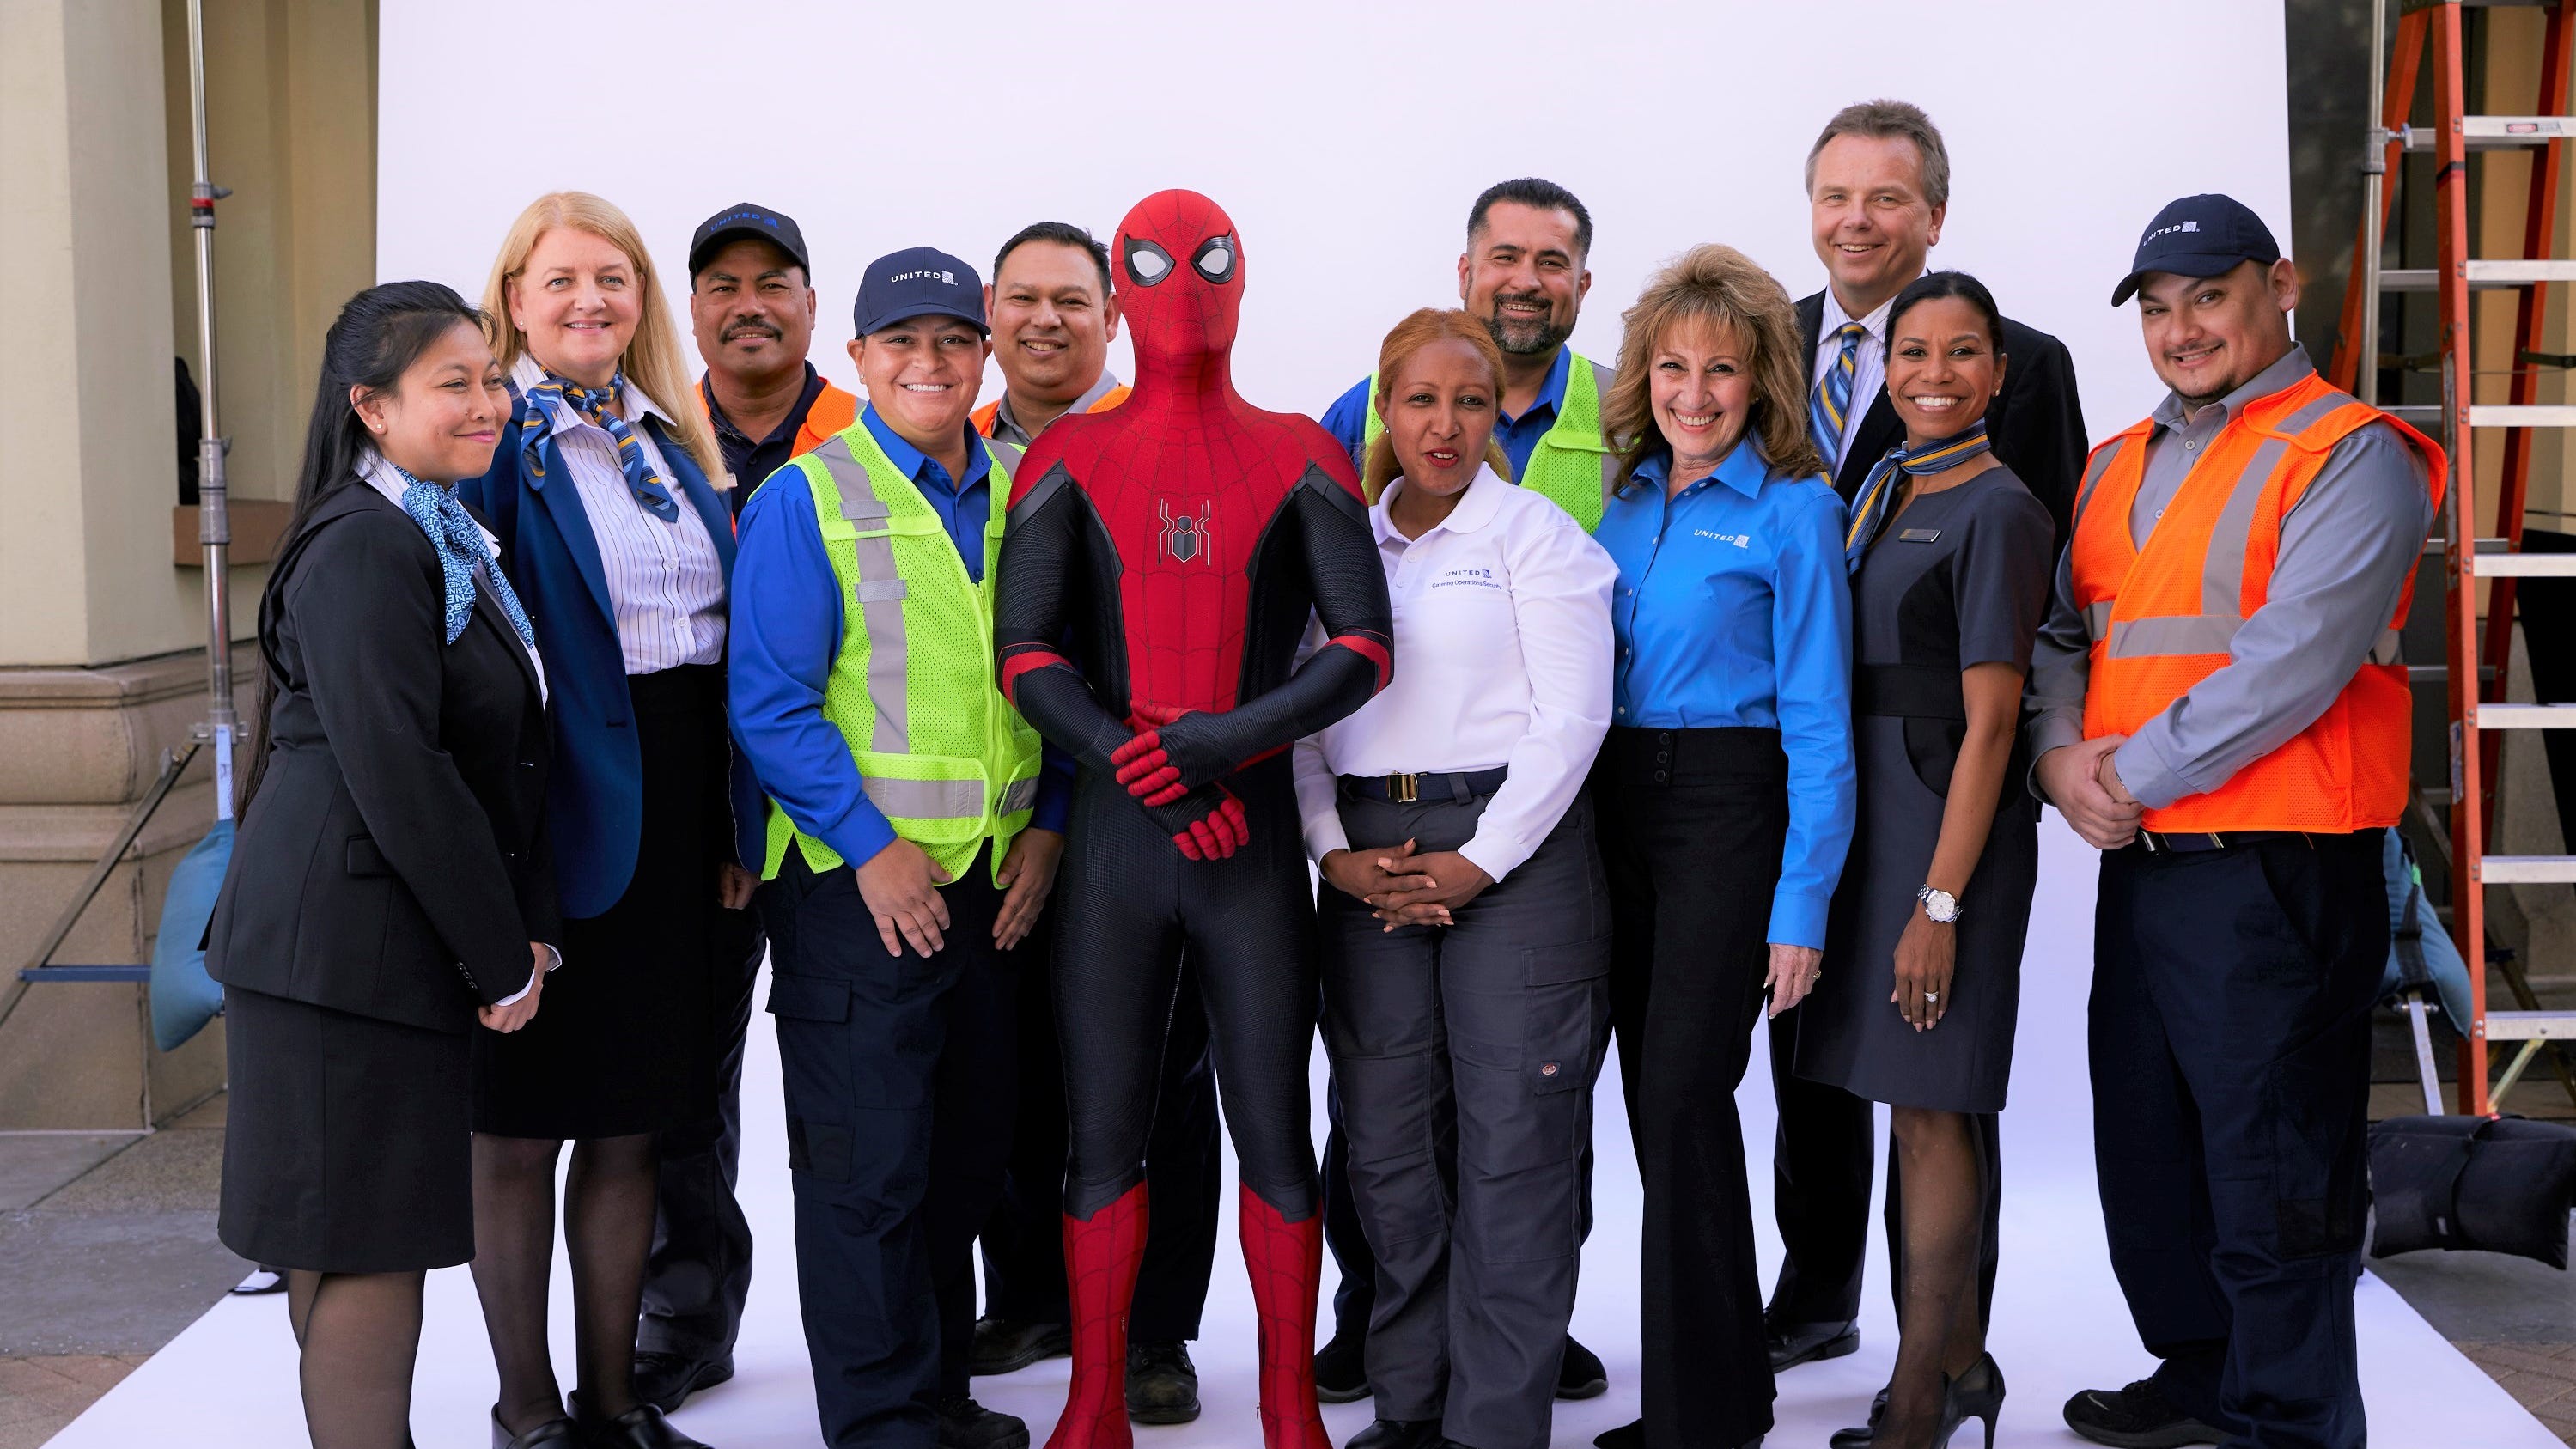 Spider Man Stars In United Airlines New Safety Video